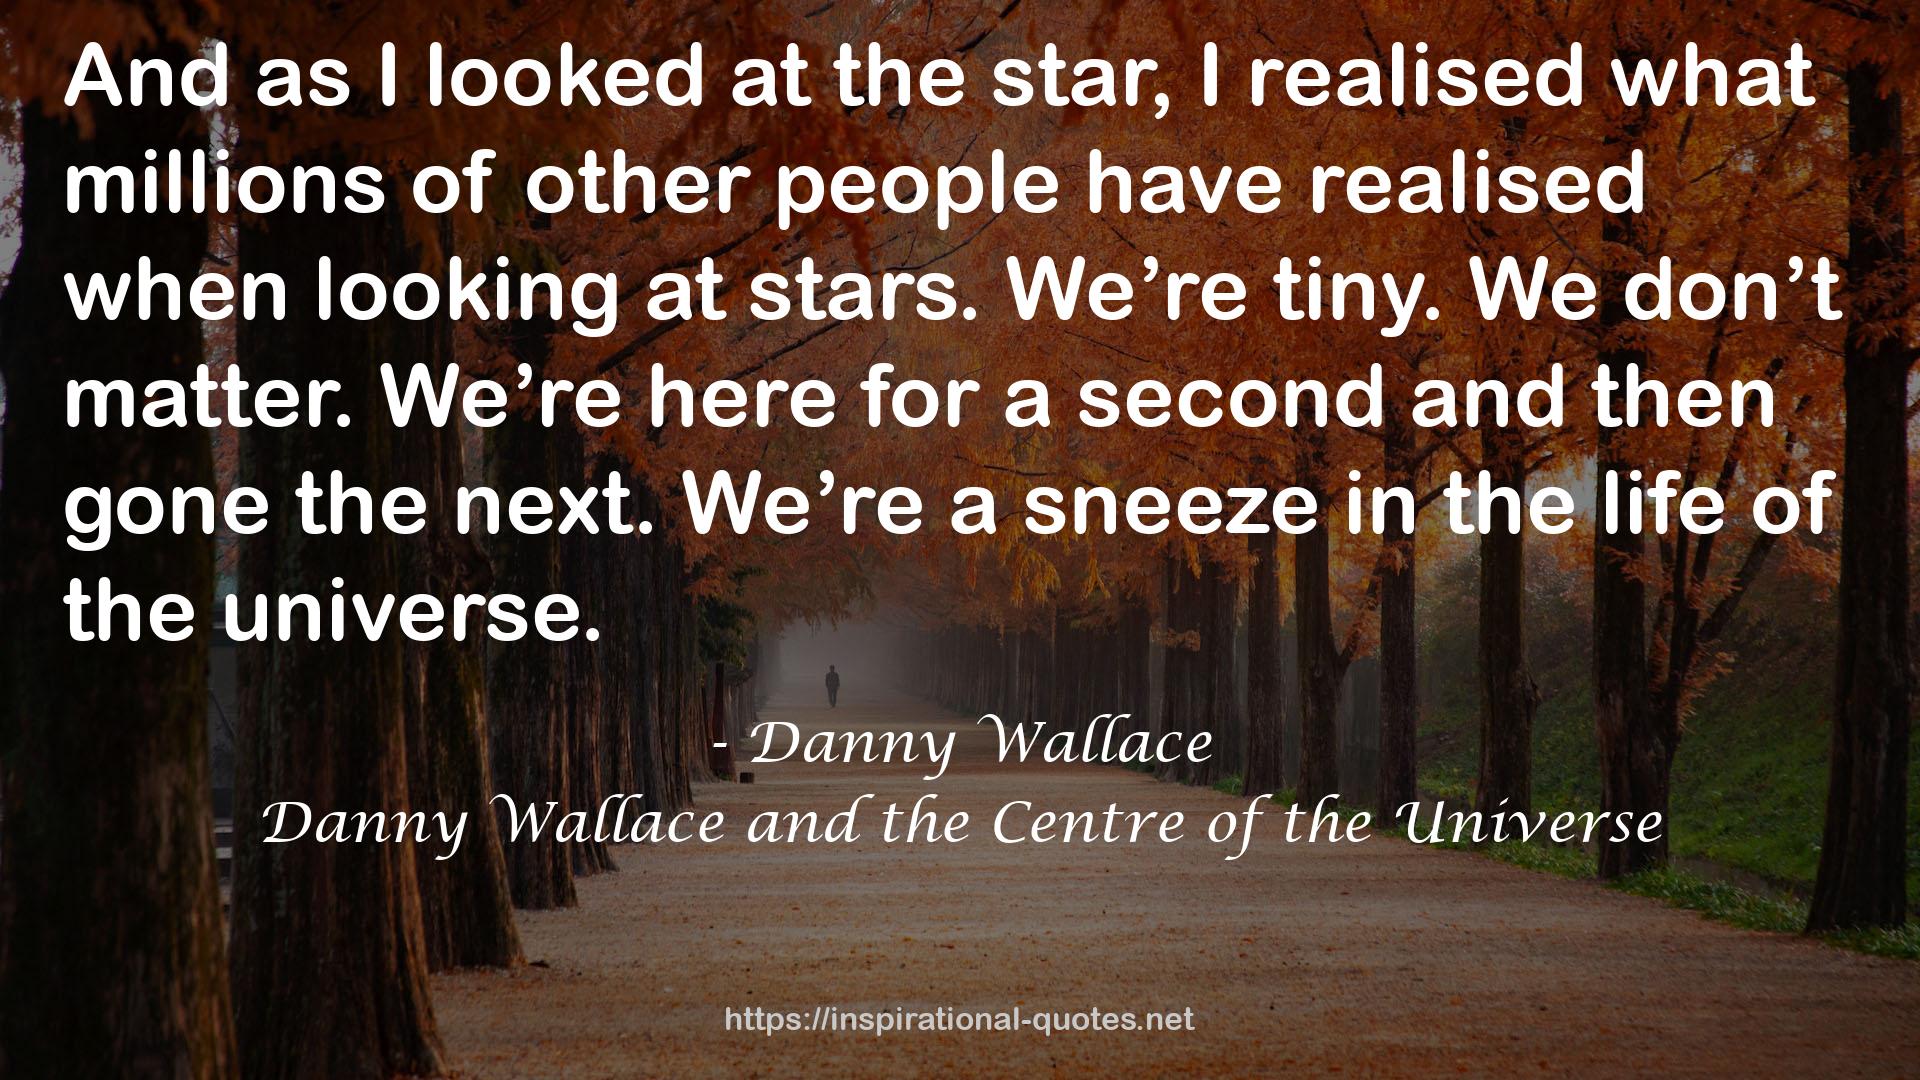 Danny Wallace and the Centre of the Universe QUOTES